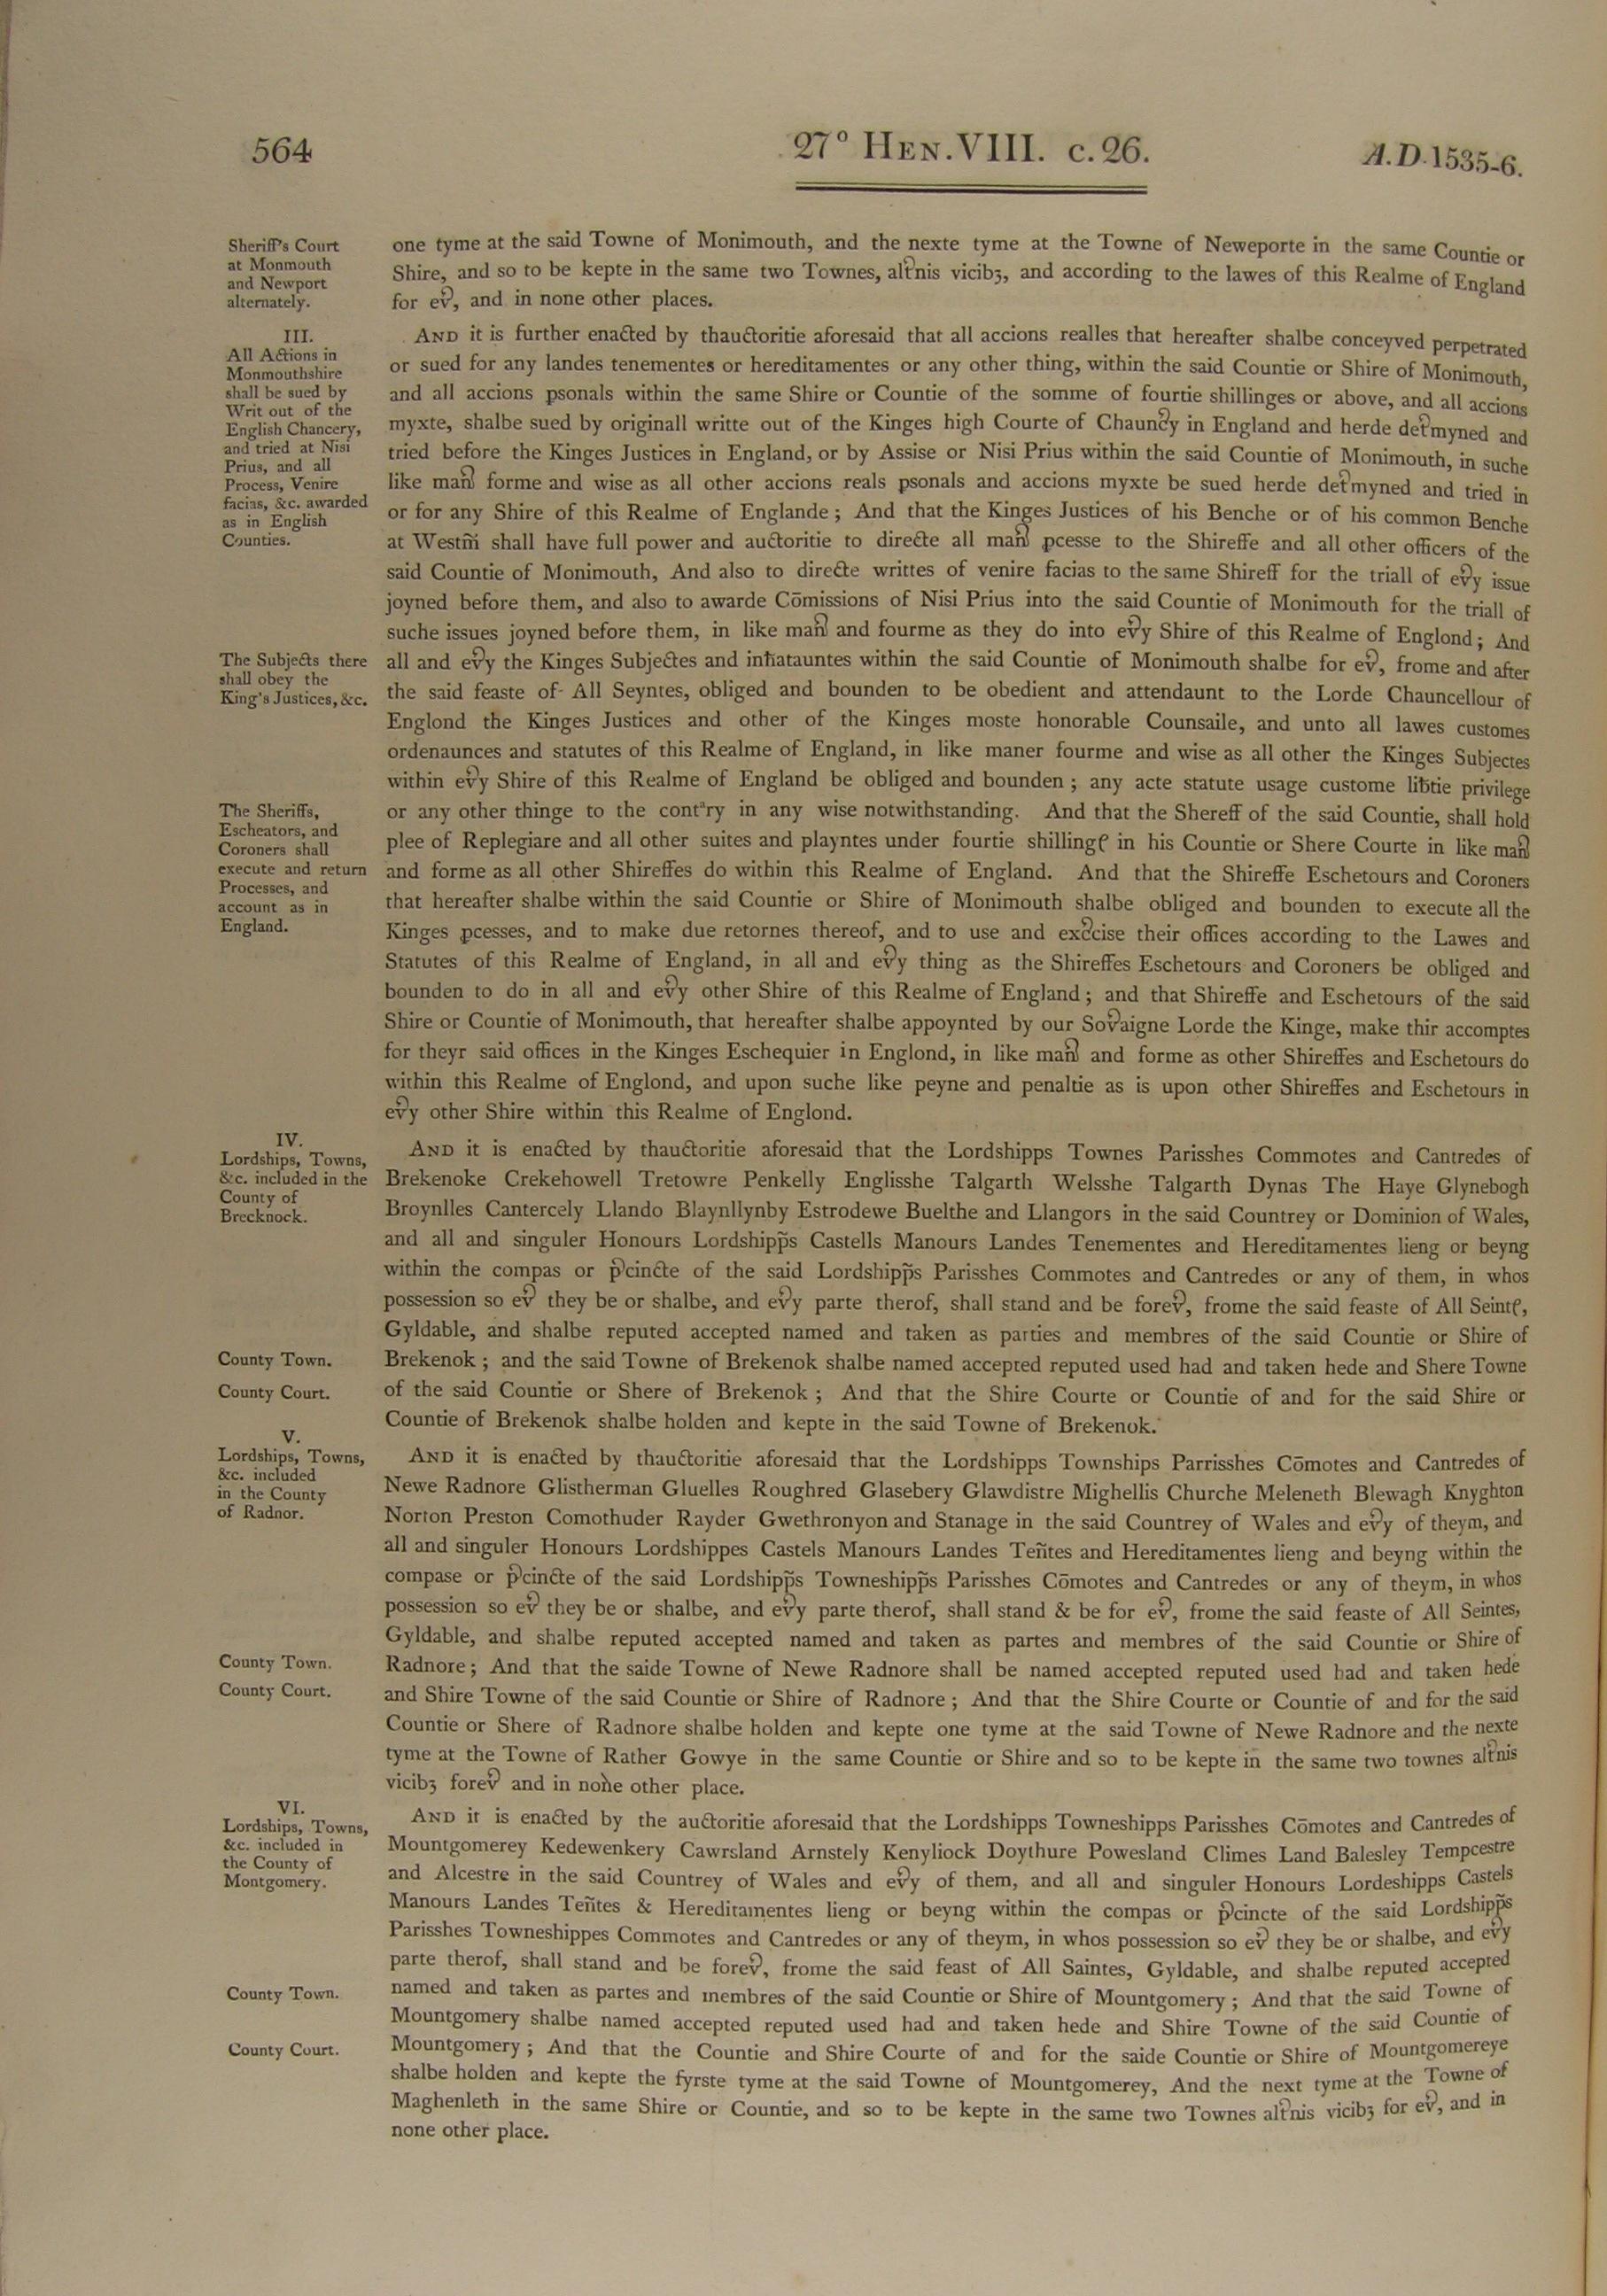 Image of 27 Henry VIII, c. 26 (page 2 of 7). Click for larger image.